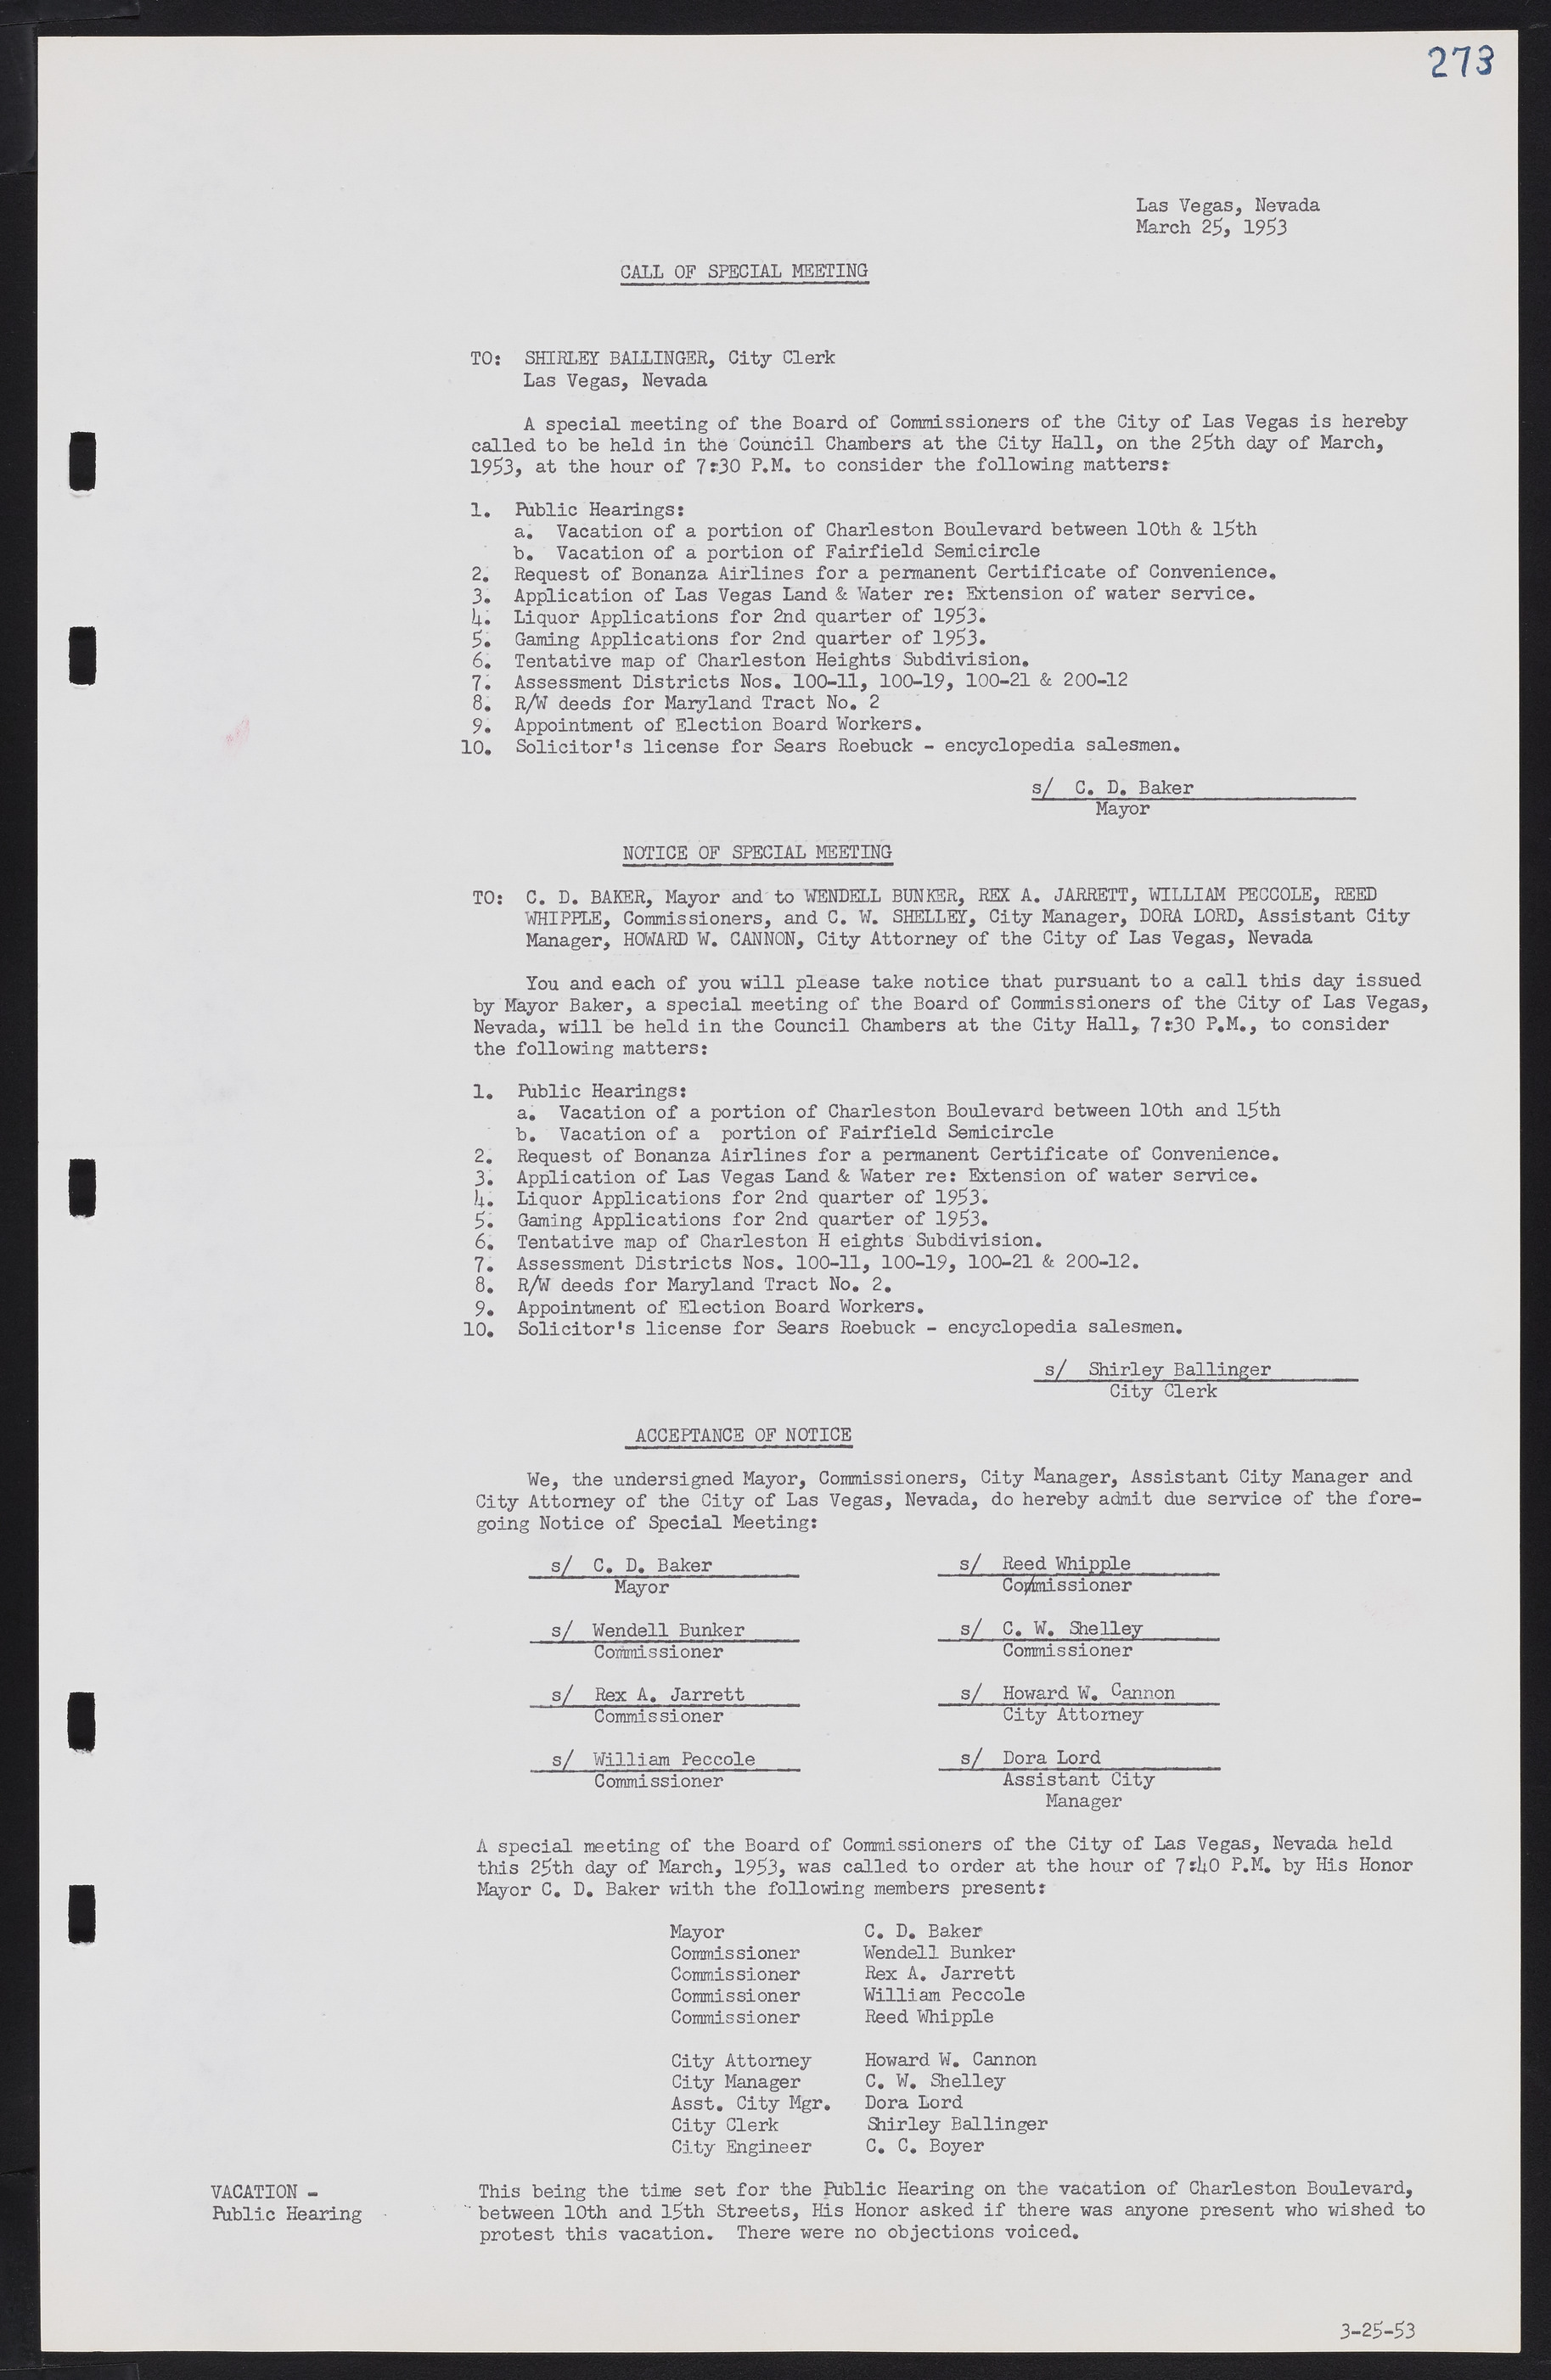 Las Vegas City Commission Minutes, May 26, 1952 to February 17, 1954, lvc000008-289